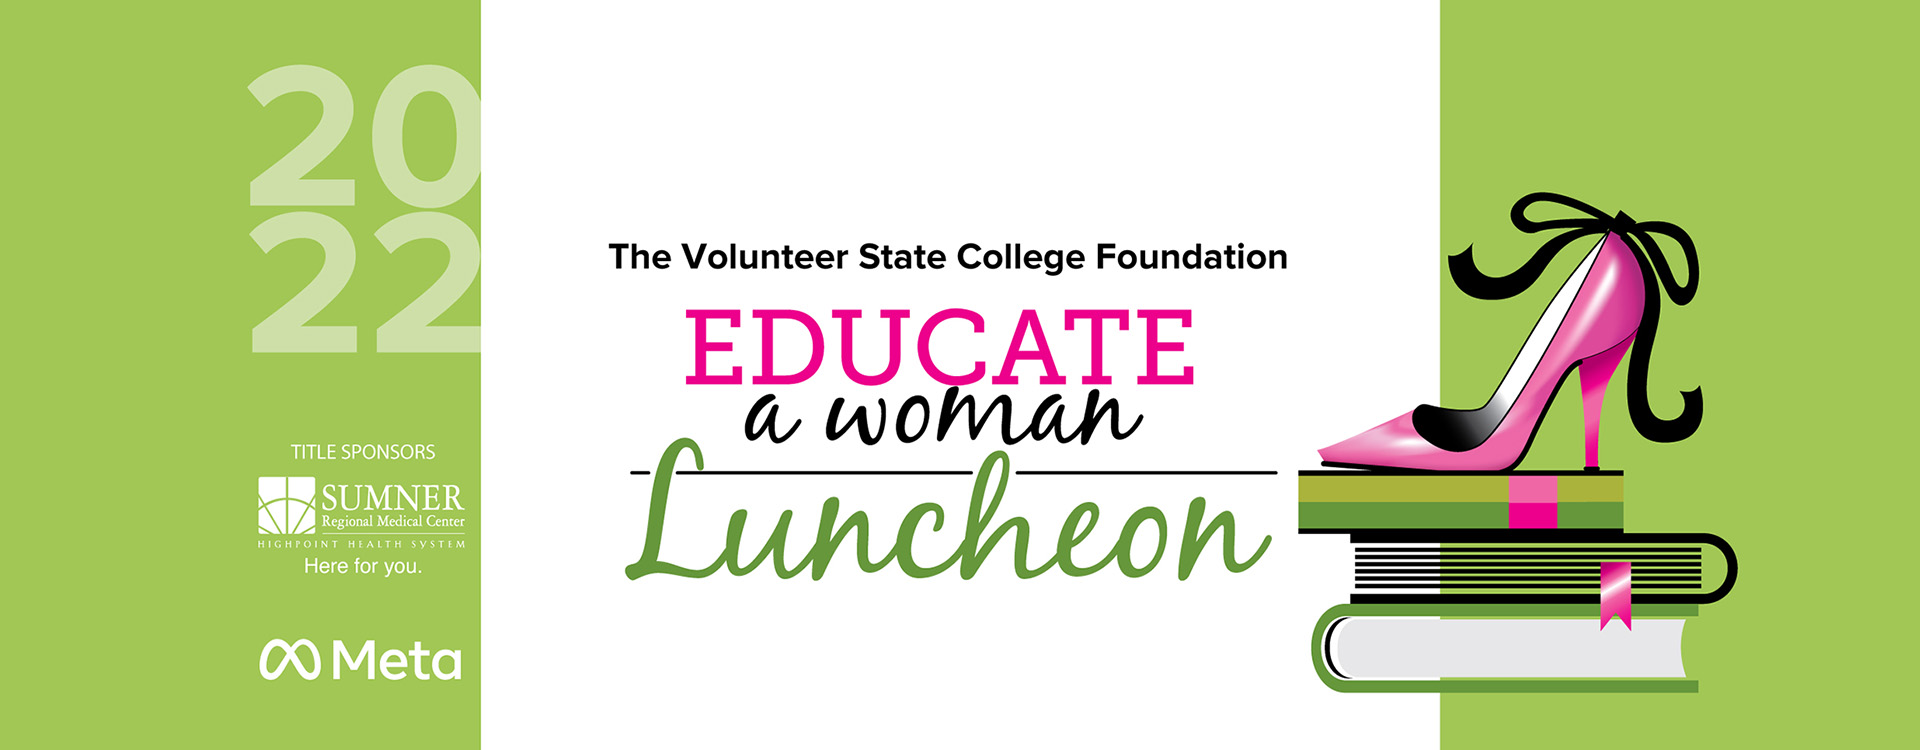 Educate a Woman will be held on Friday, April 1, 2022